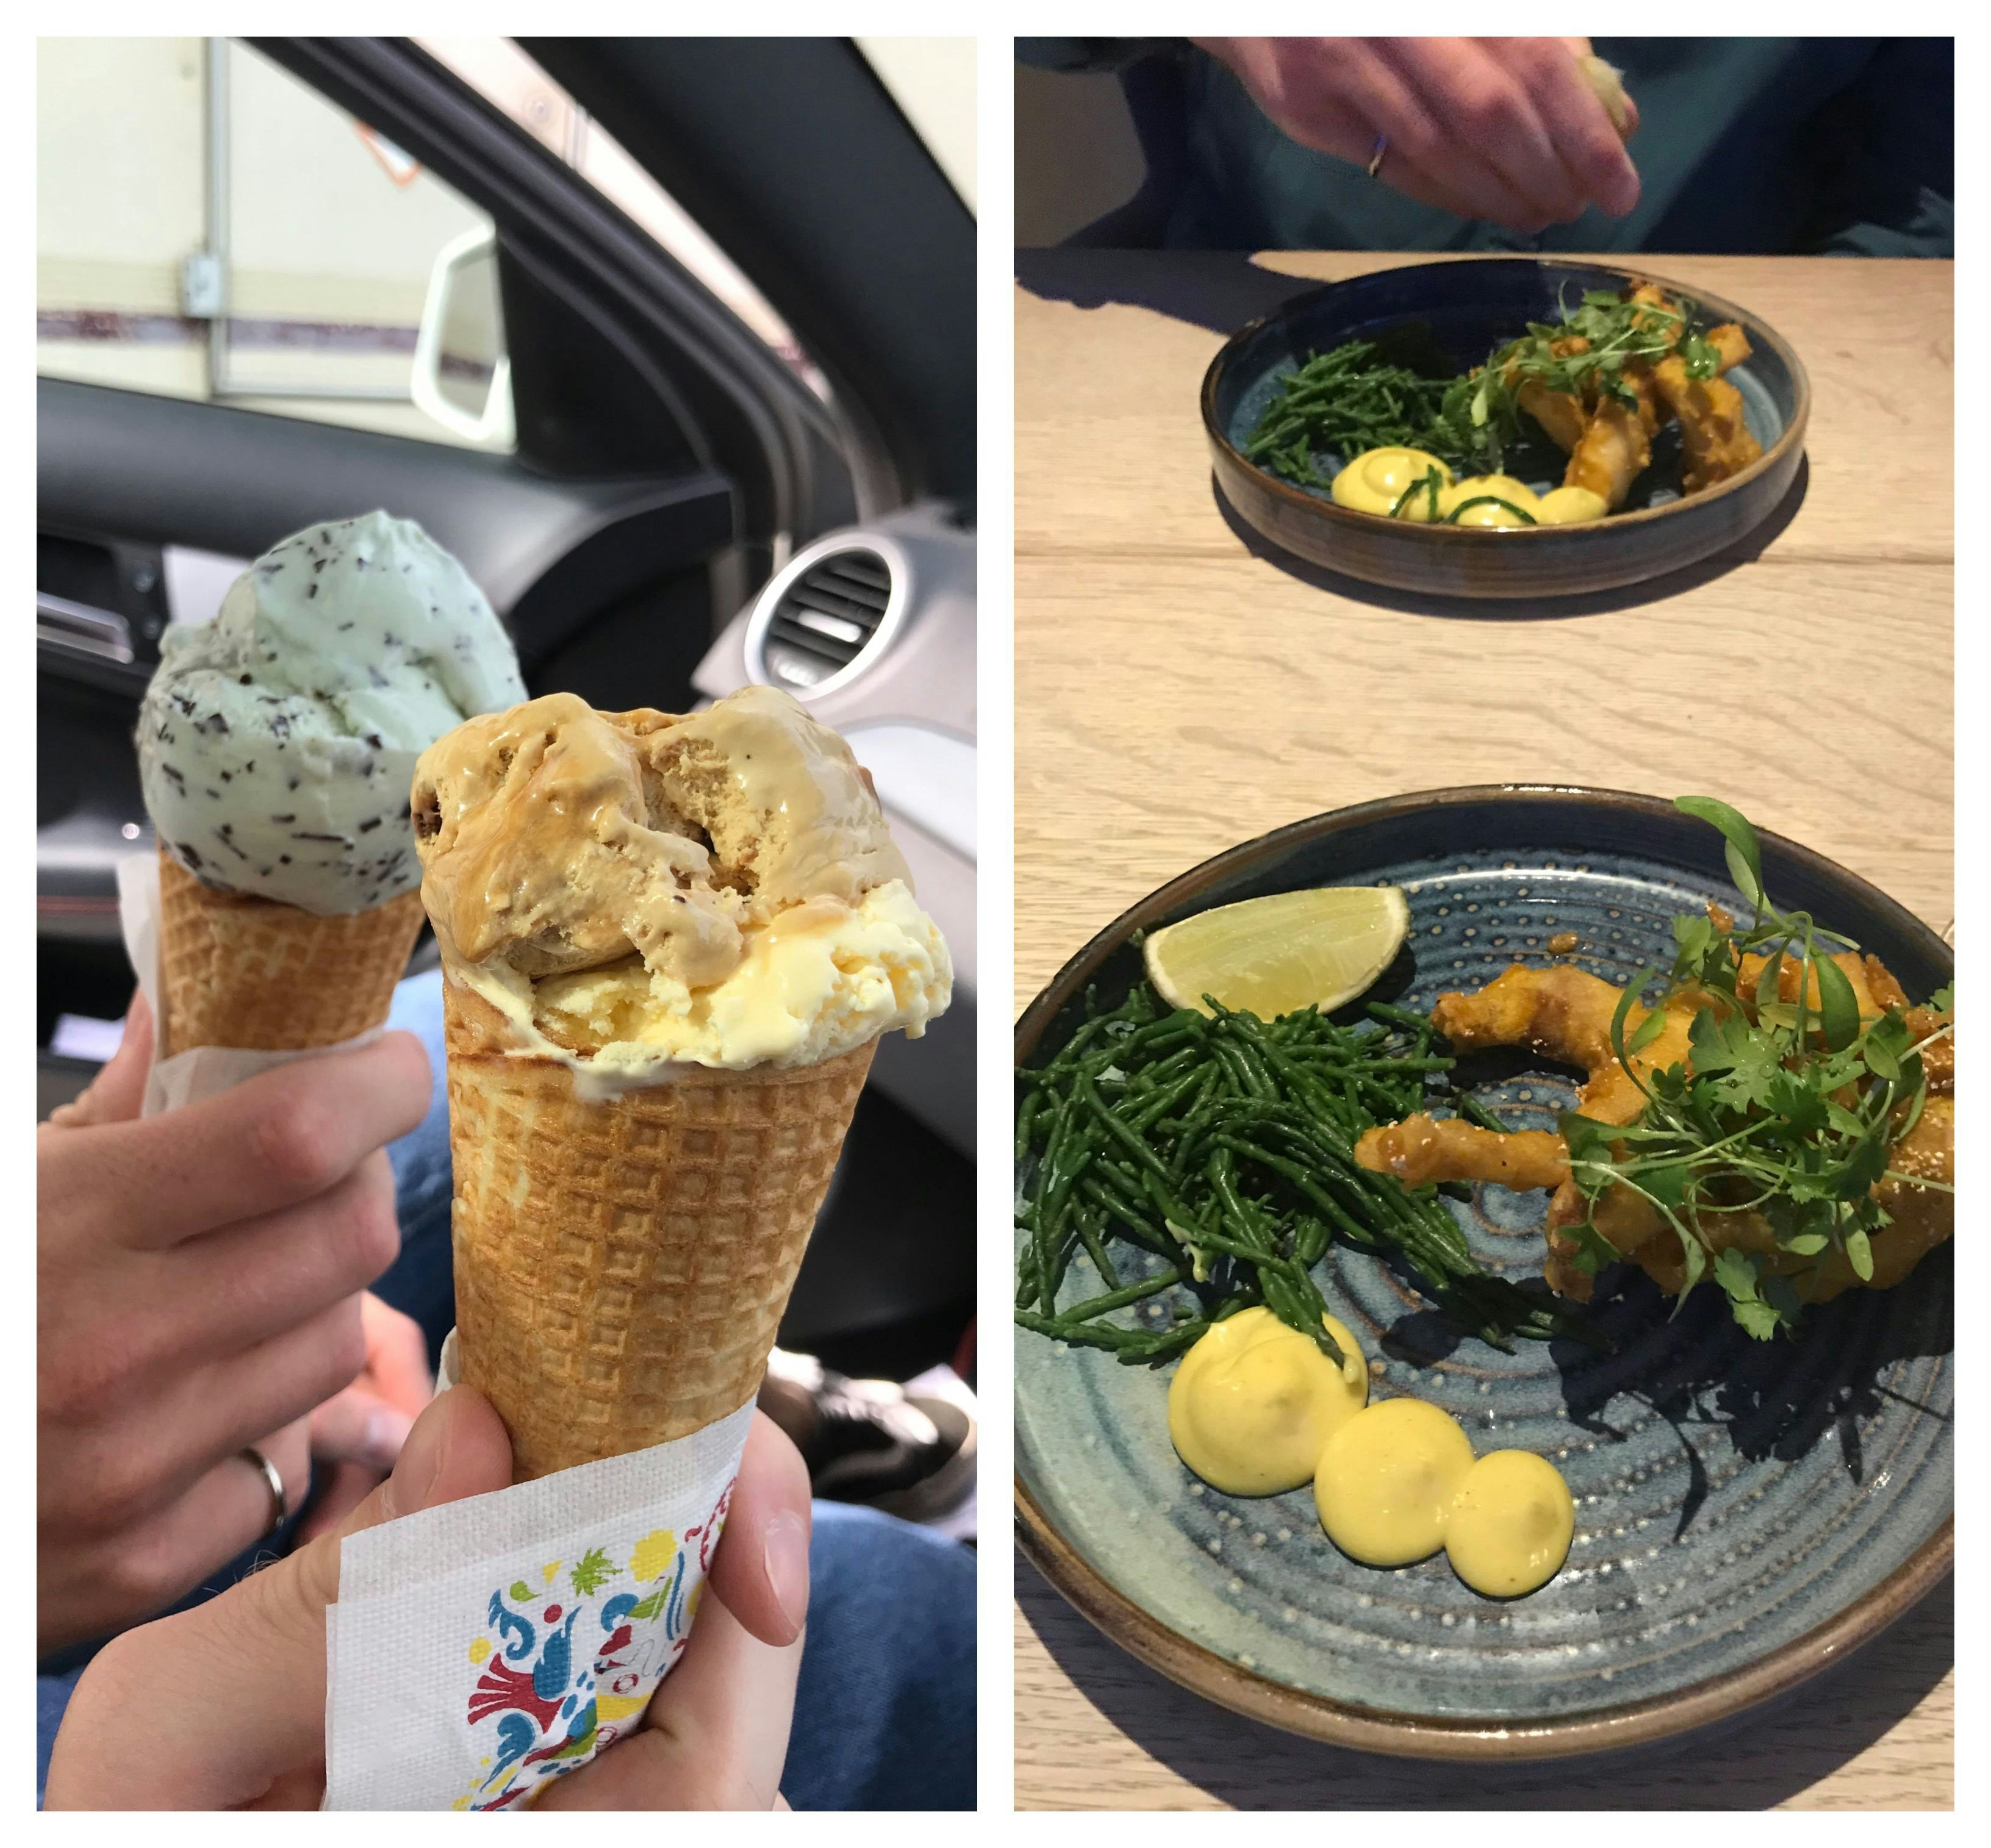 On the left, a close up of two ice-cream cones. On the right, two starters of tempura fish.